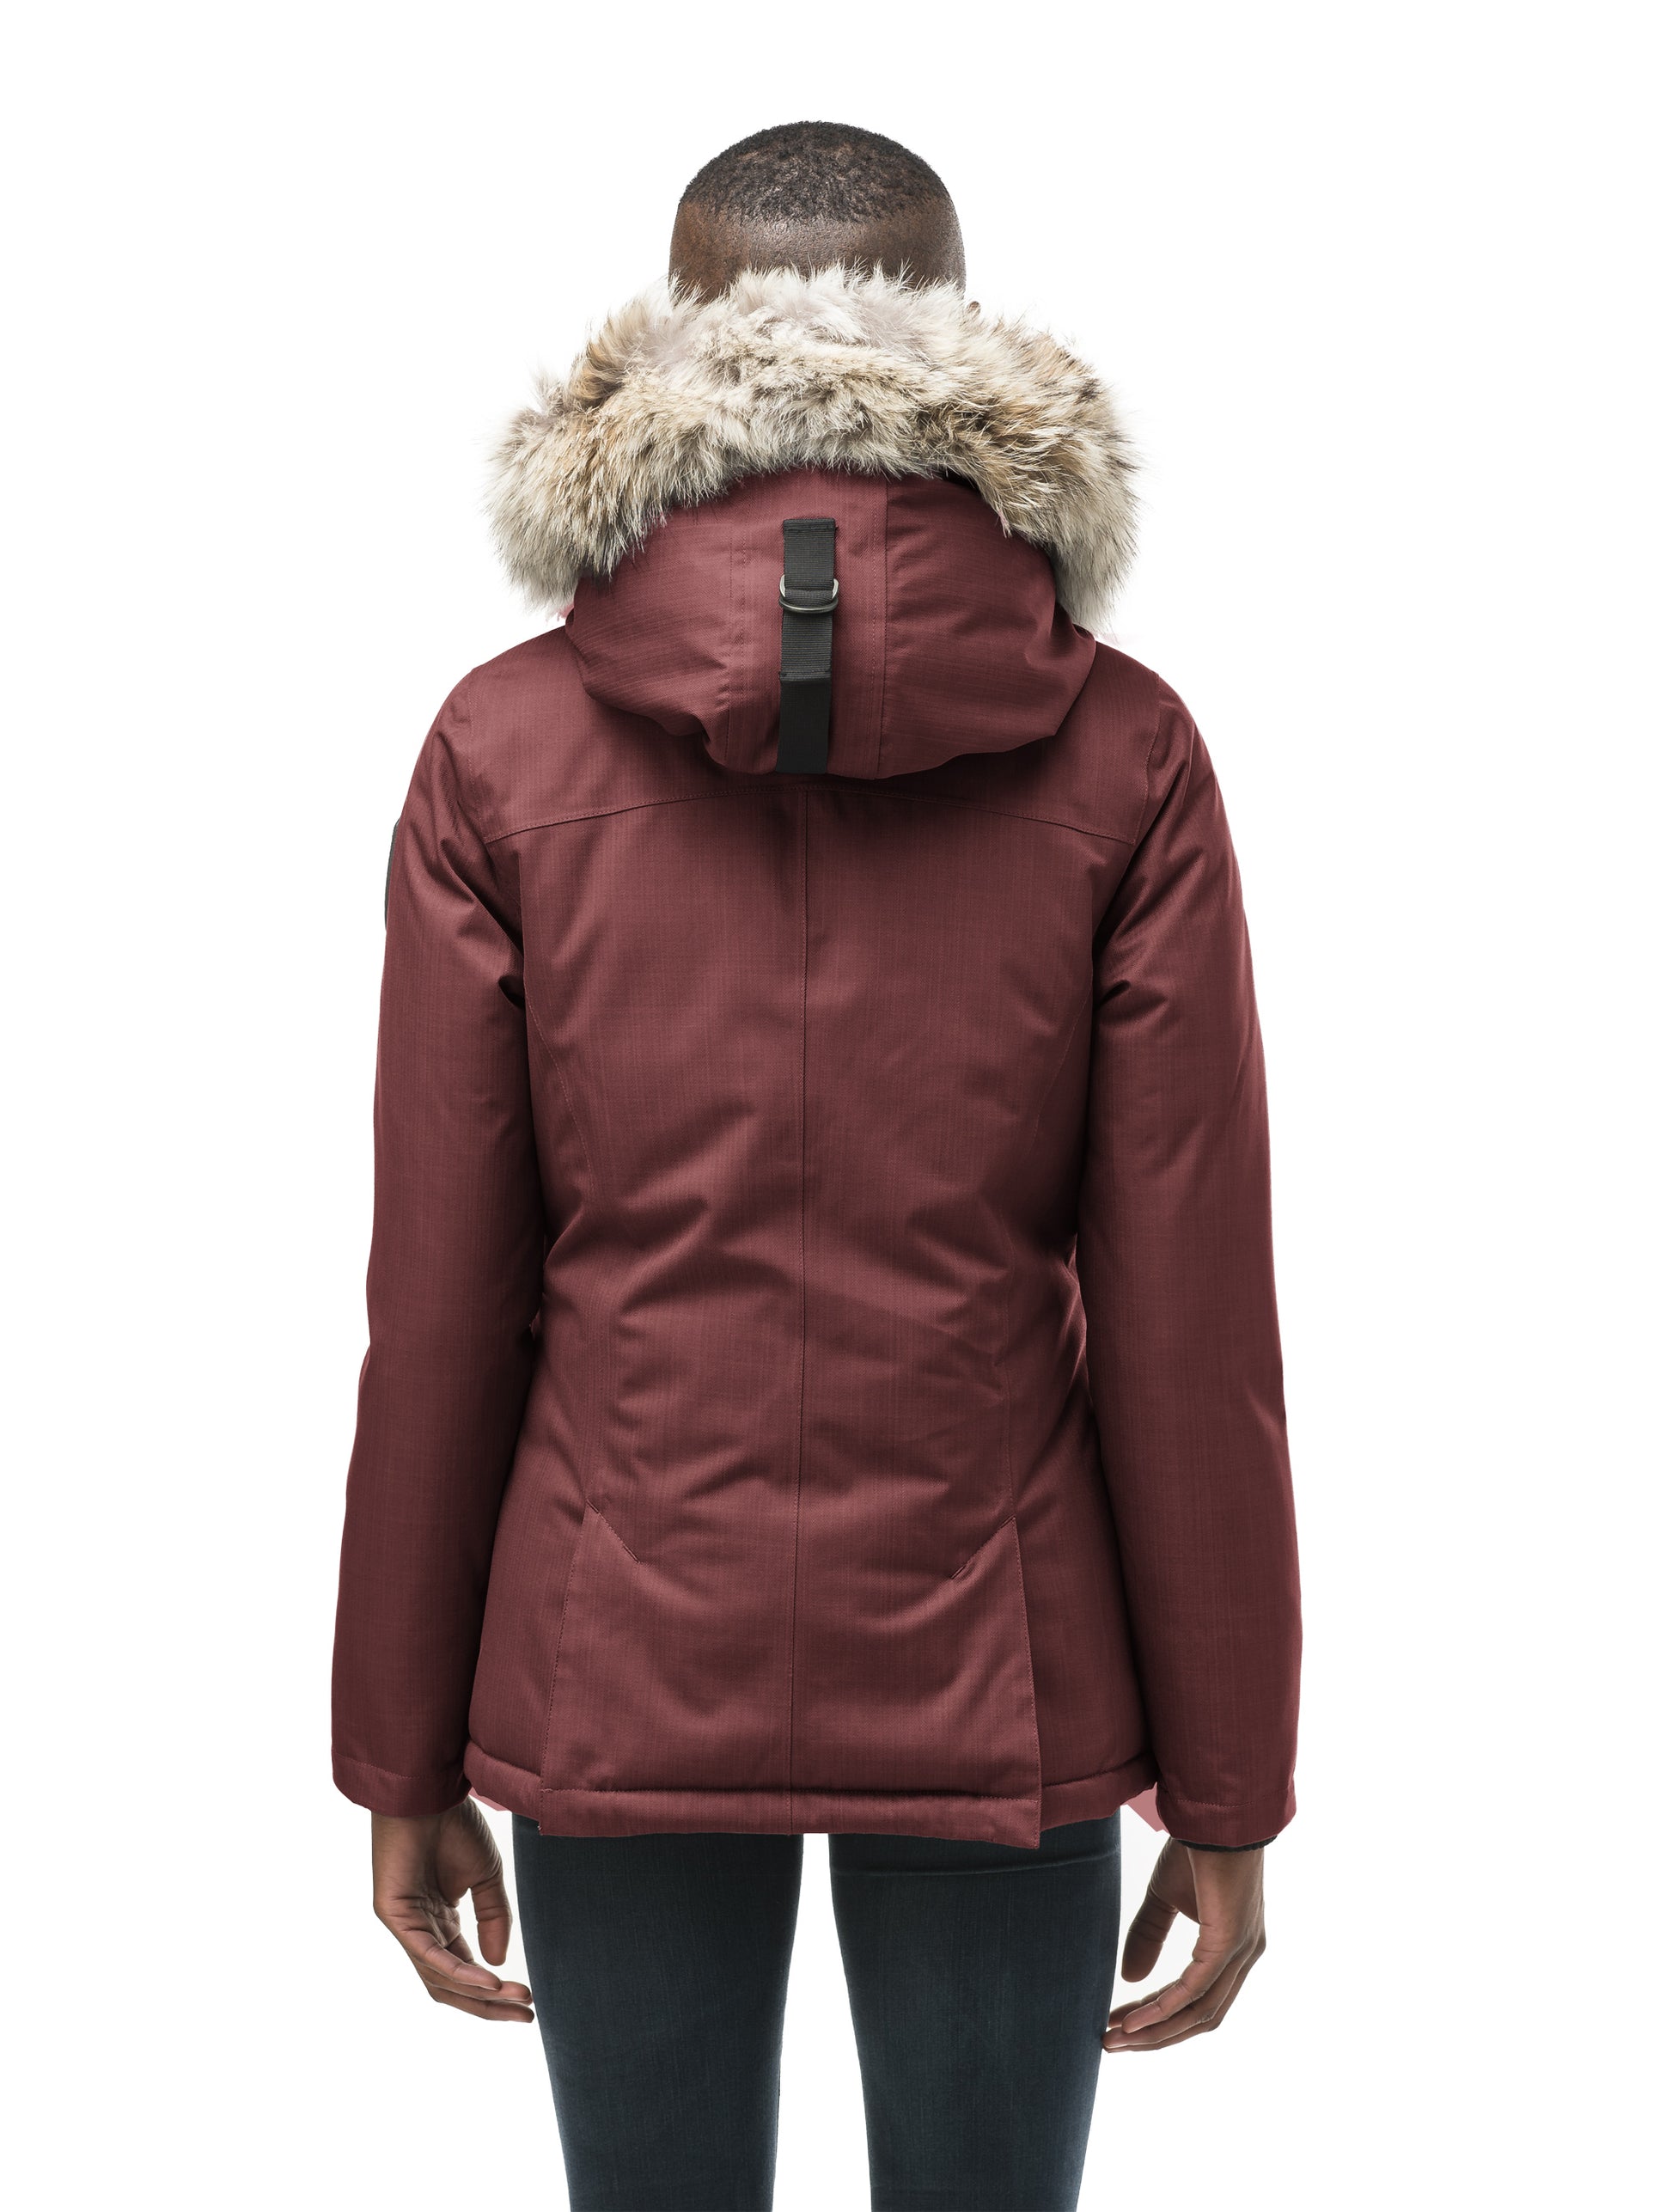 Women's hip length down filled parka in CH Red Rum